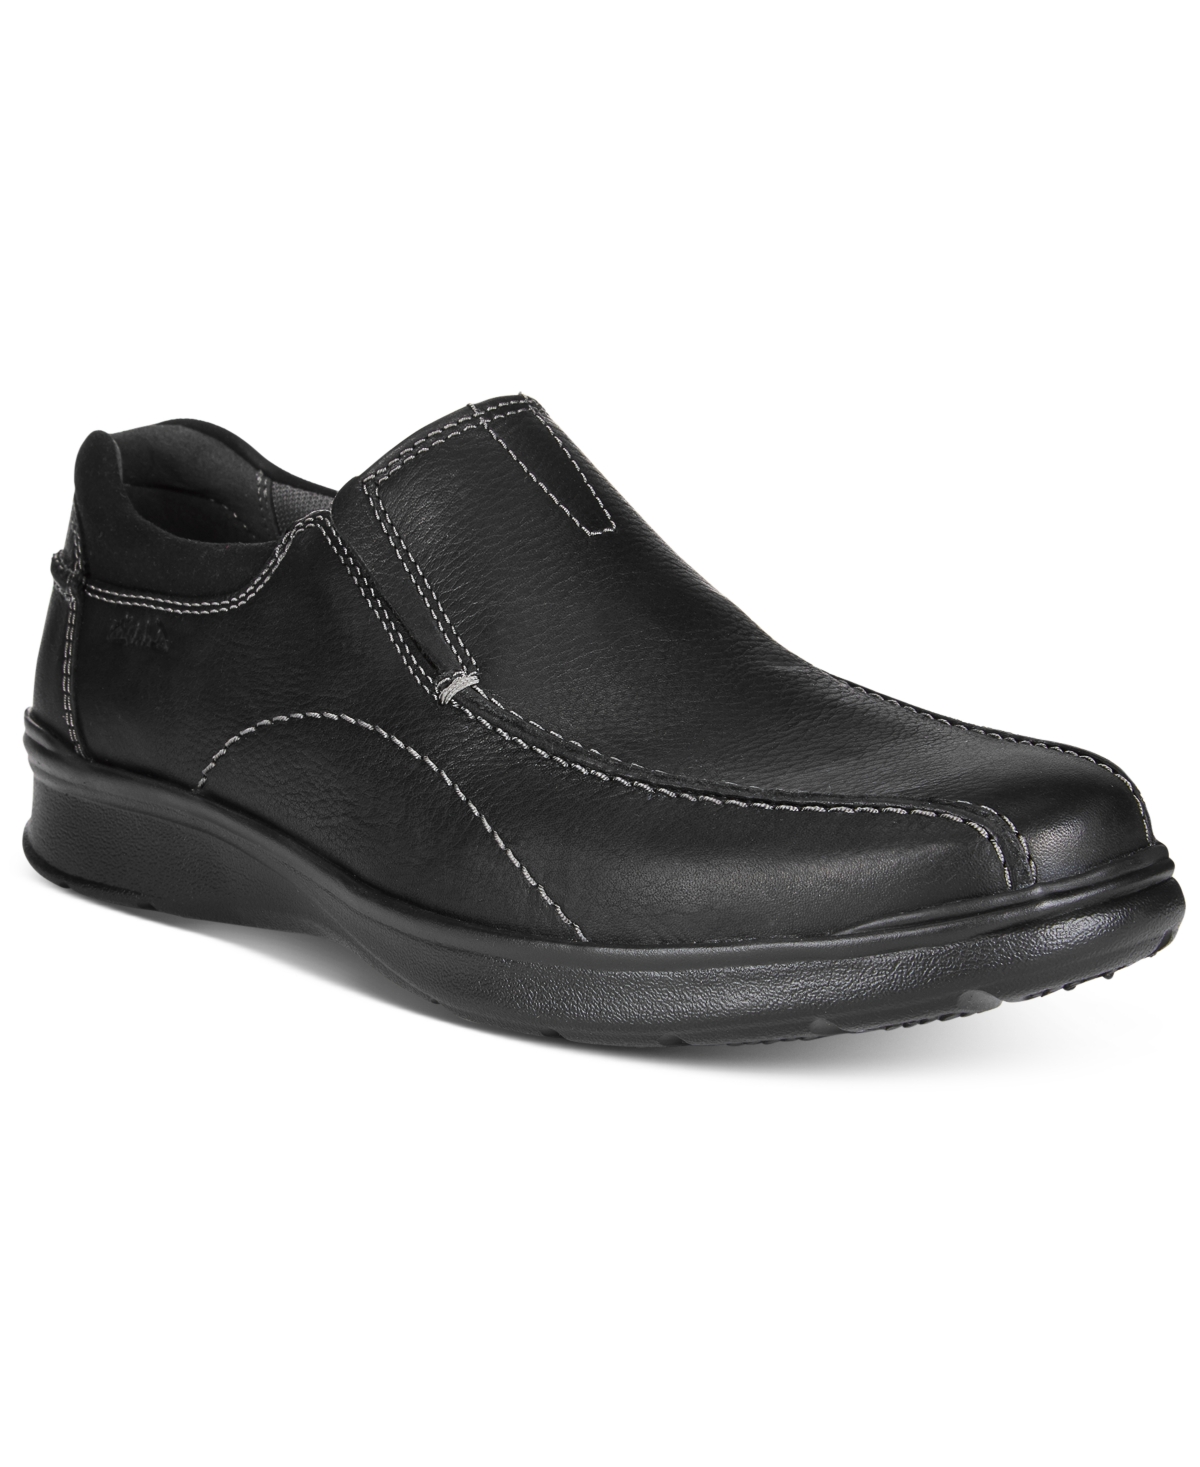 Men's Cotrell Step Bike Toe Slip On - Brown Oily Leather